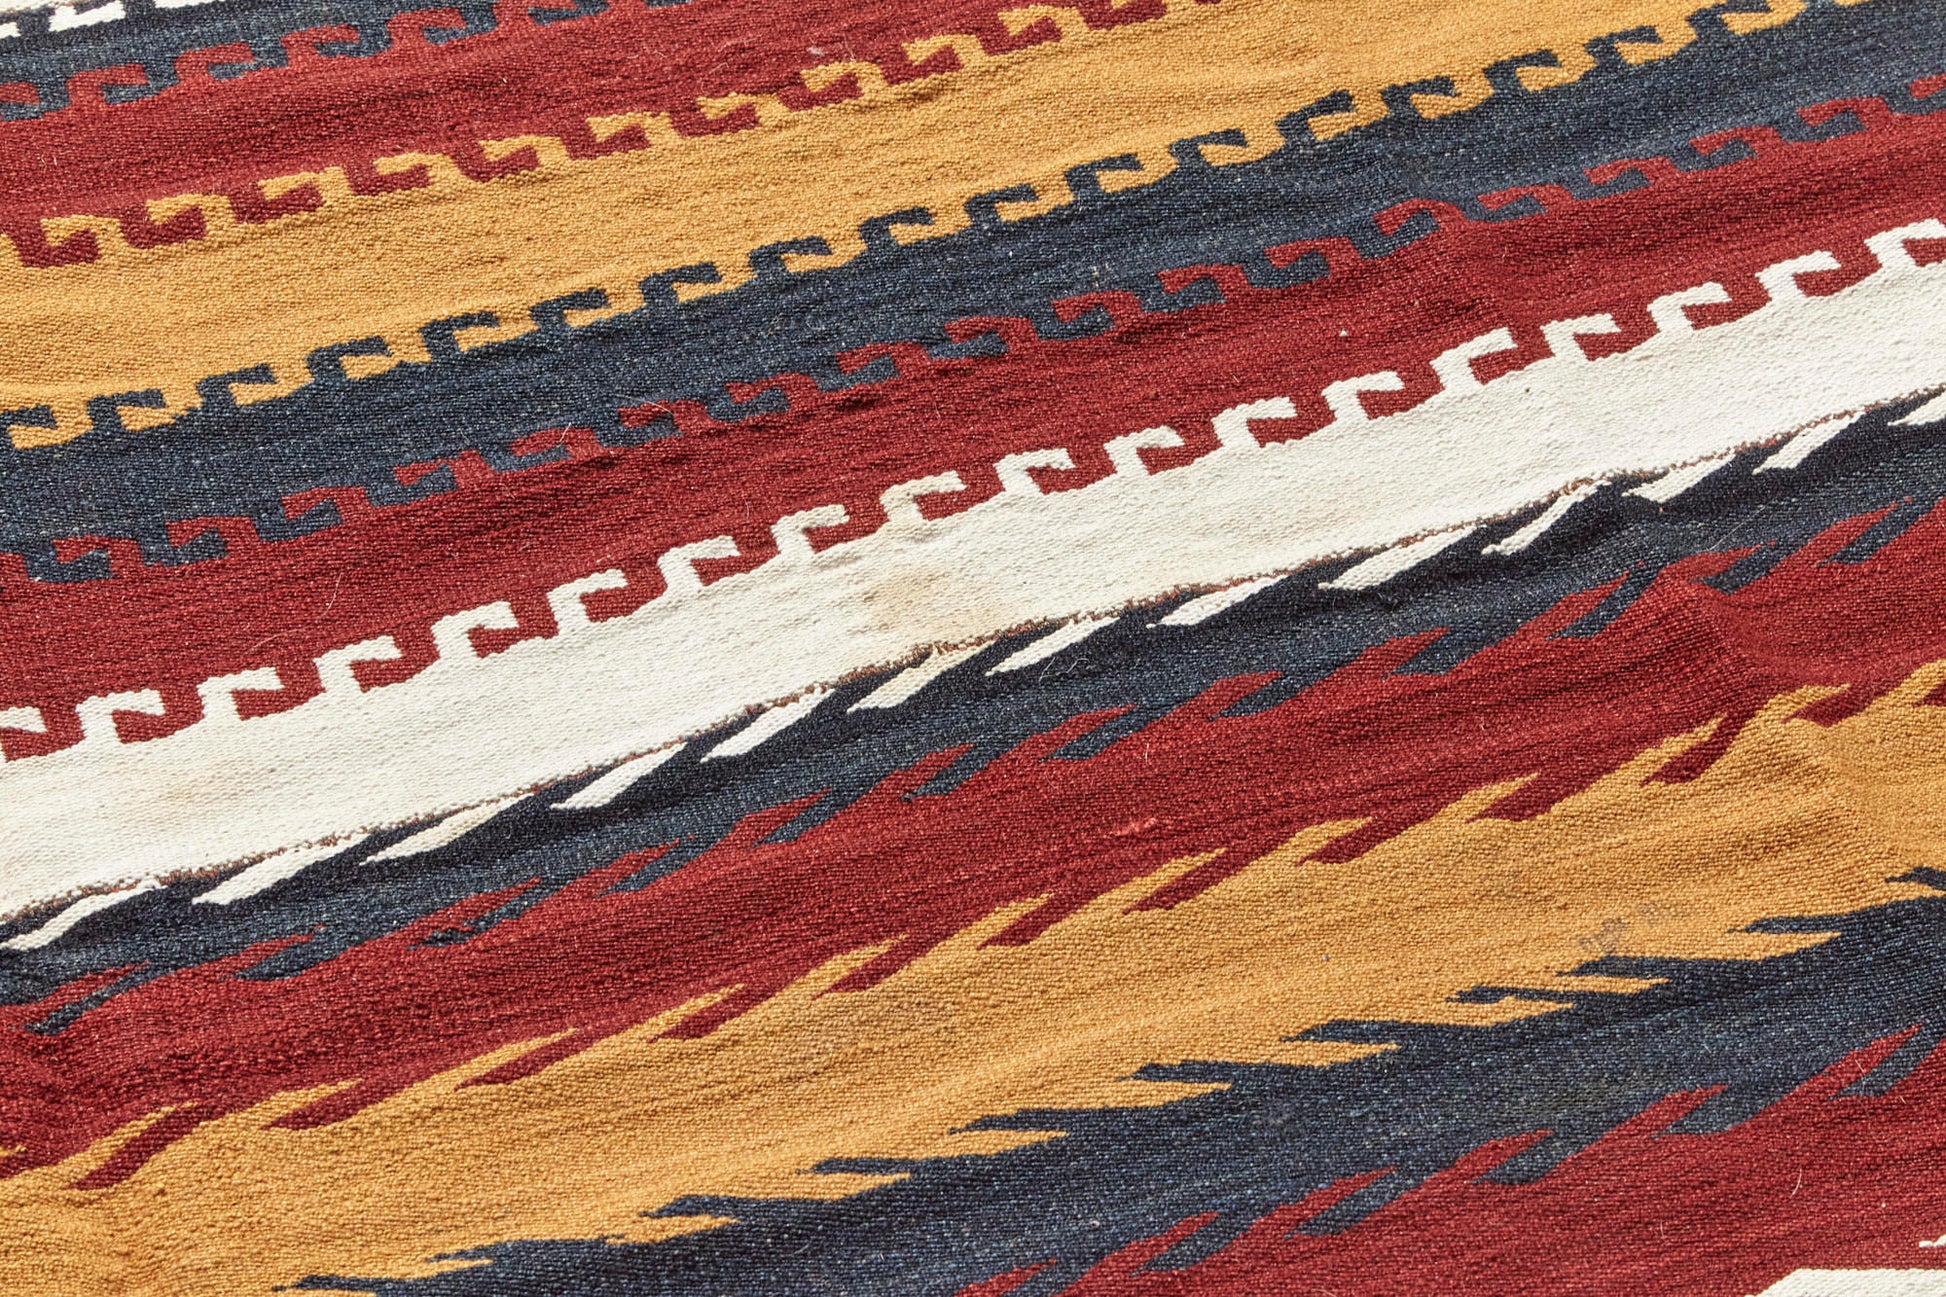 Antique Kilim Turkish rug with red, grey, gold and cream stripes. Hand woven piece, perfect for a living room, bedroom or kitchen - Available from King Kennedy Rugs Los Angeles